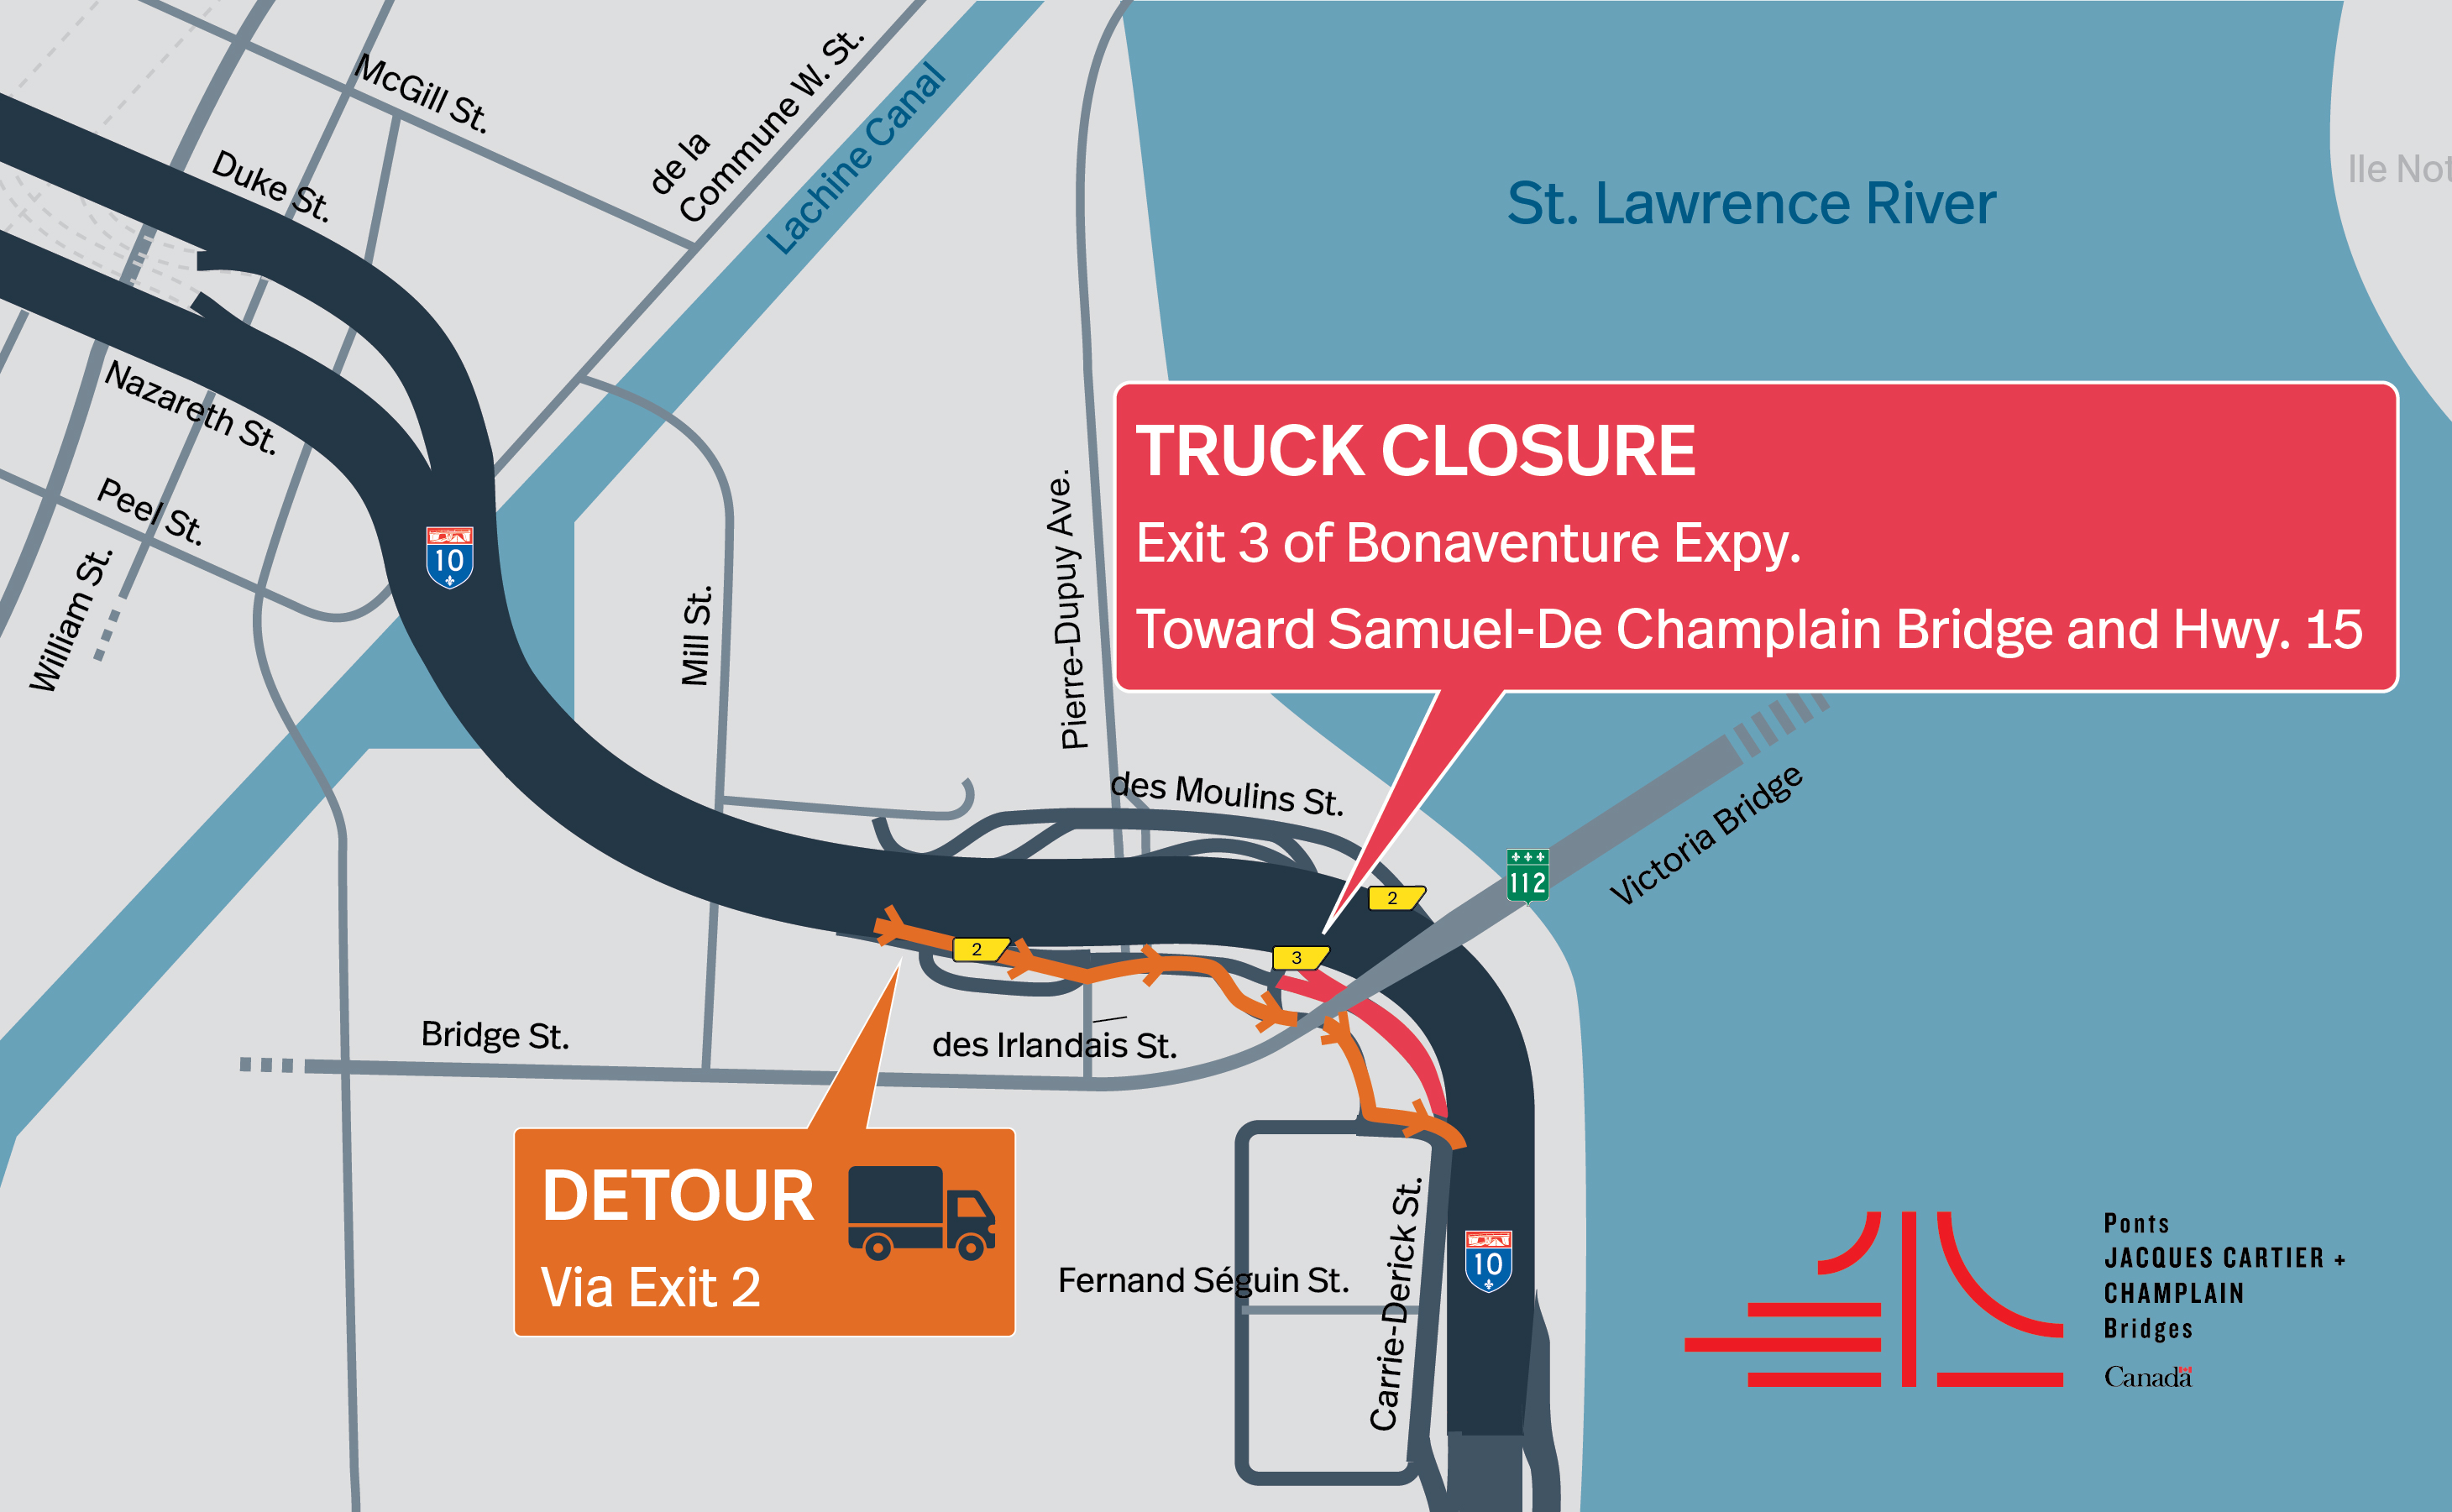 Bonaventure Expy. | TRUCKS ONLY : Complete closure of the Exit 3 and of a portion of the Bonaventure Expy., toward Samuel De Champlain Bridge, unlimited duration